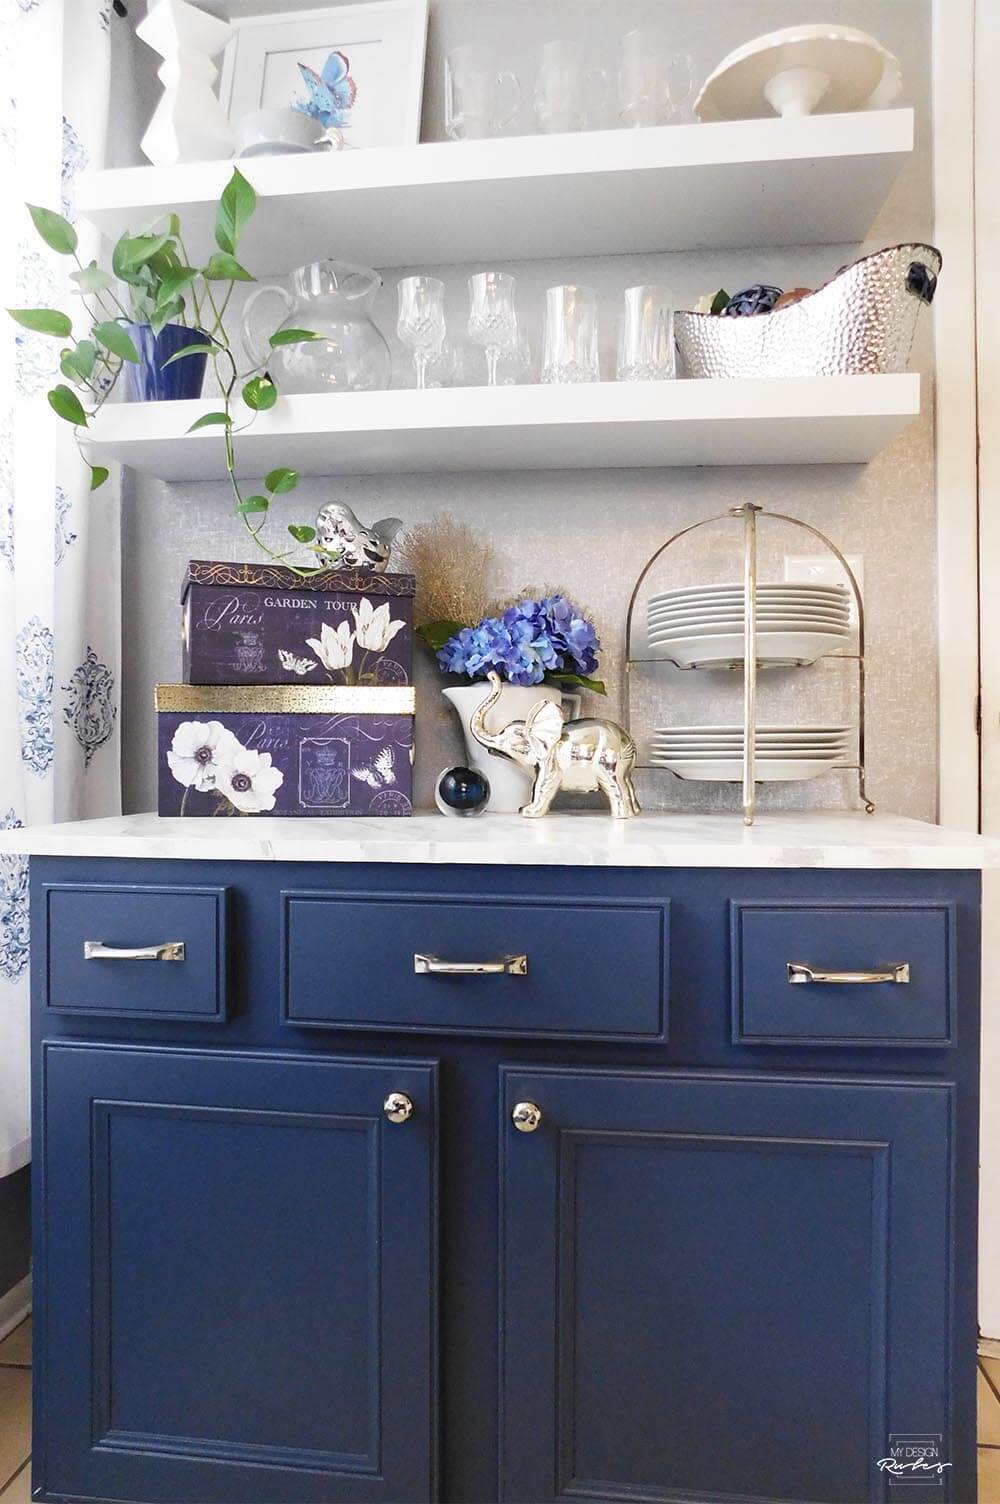 Painted kitchen cabinets using Sherwin Williams Indigo Batik. An easy DIY upgrade to an online garage sale find. Use it as a test before you paint your whole kitchen. #offerup #beforeandafter #paintedfurniture #color #furniture